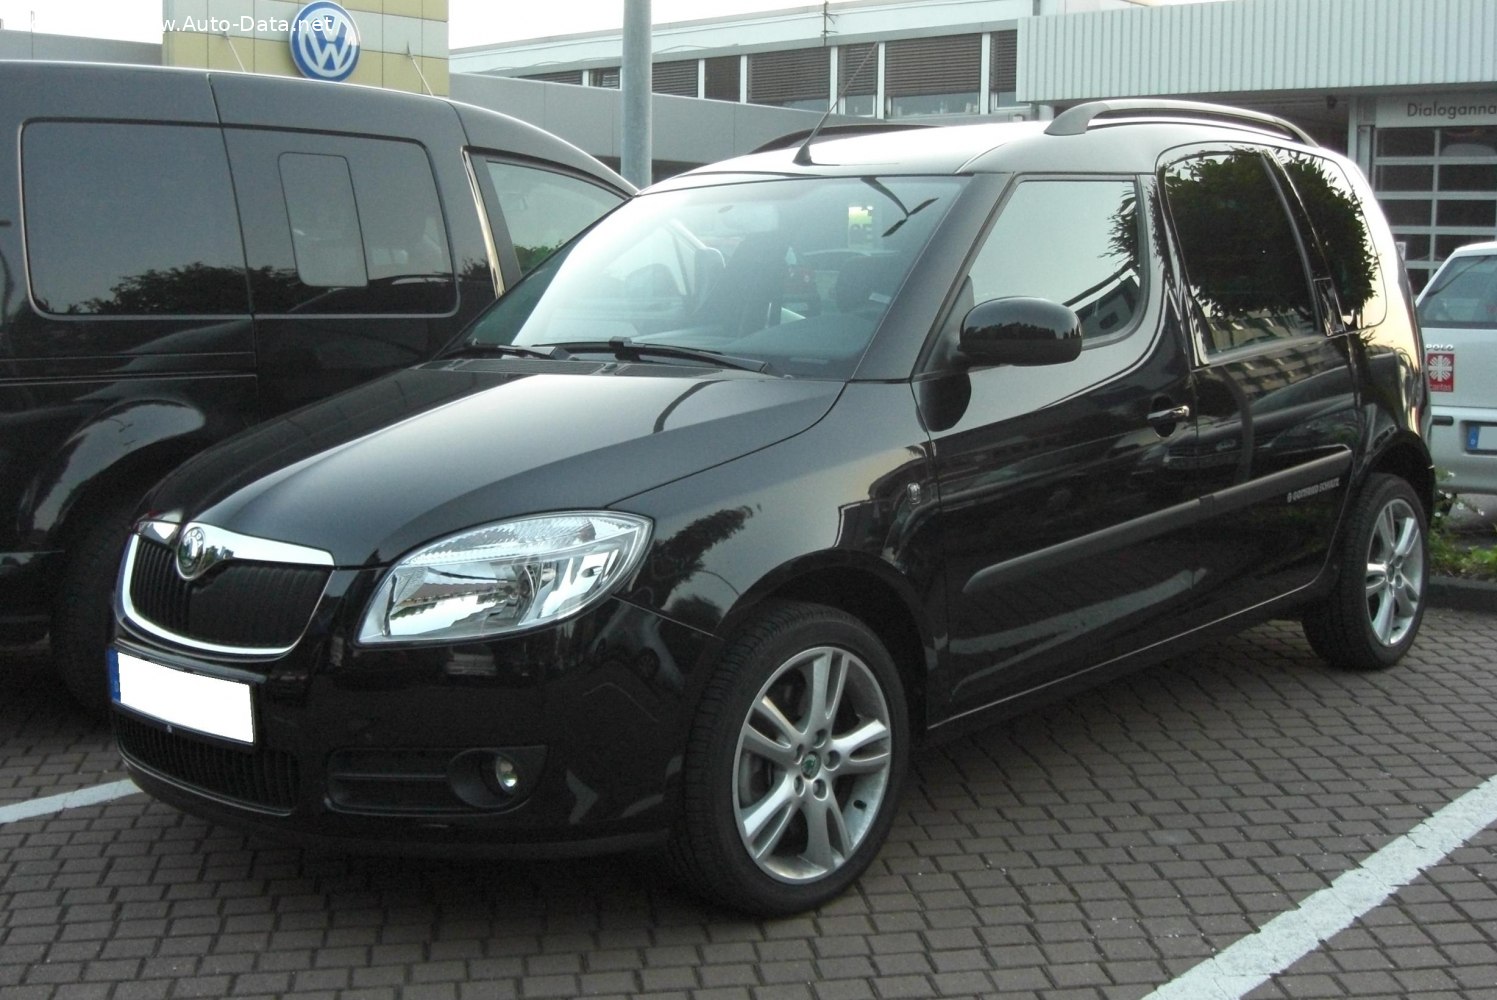 SKODA ROOMSTER - ROOMSTER 1.6 TDI 105 CR AMBITION 2